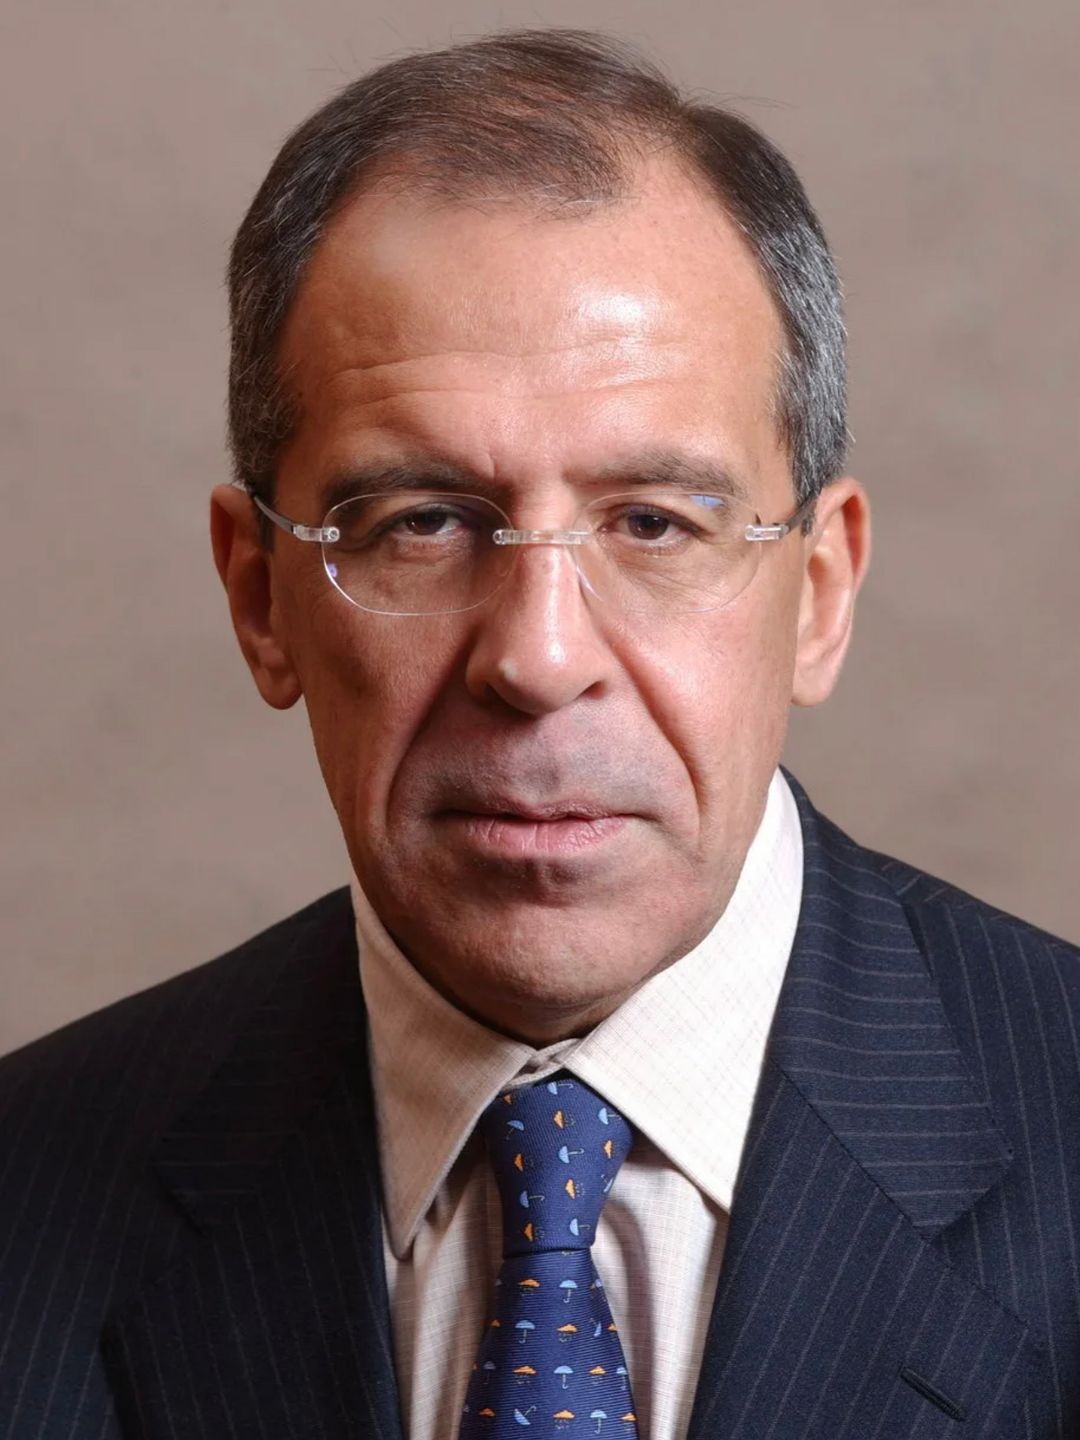 Sergey Lavrov who is his mother